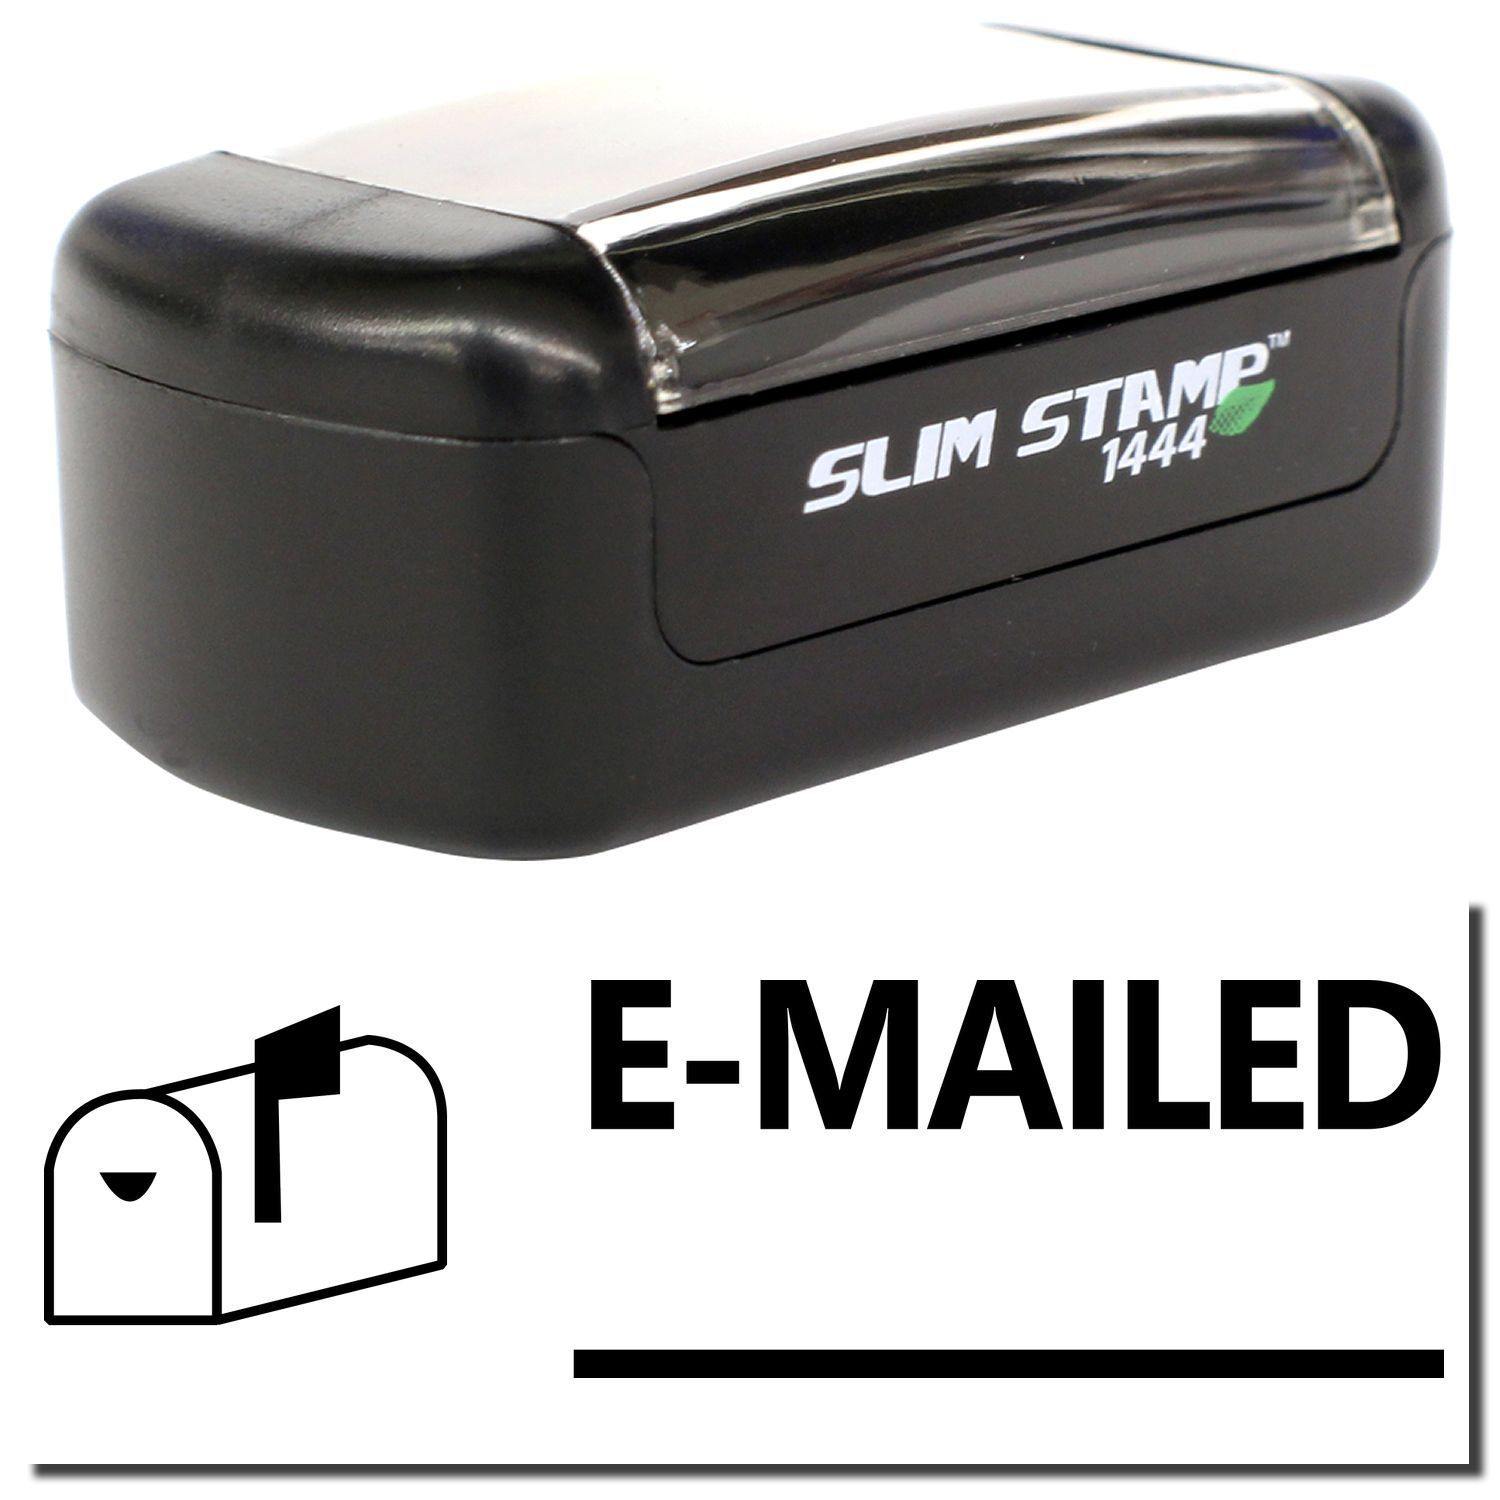 A stock office pre-inked stamp with a stamped image showing how the text "E-MAILED" with a line underneath the text and an image of a mailbox with the flag up on the left is displayed after stamping.